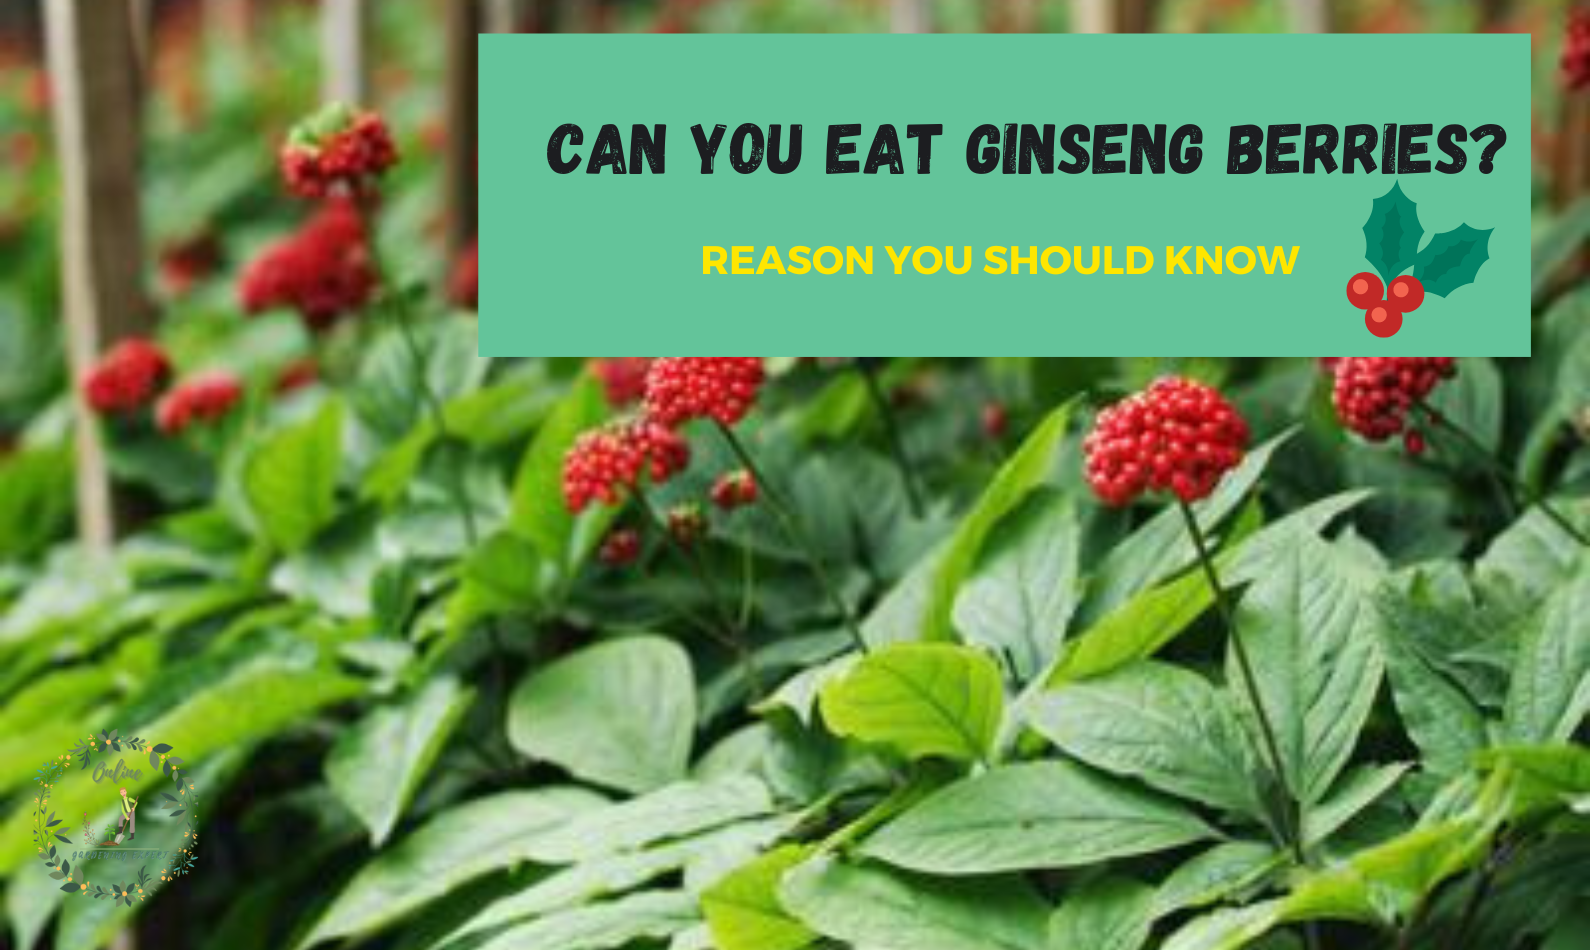 Can You Eat Ginseng Berries?